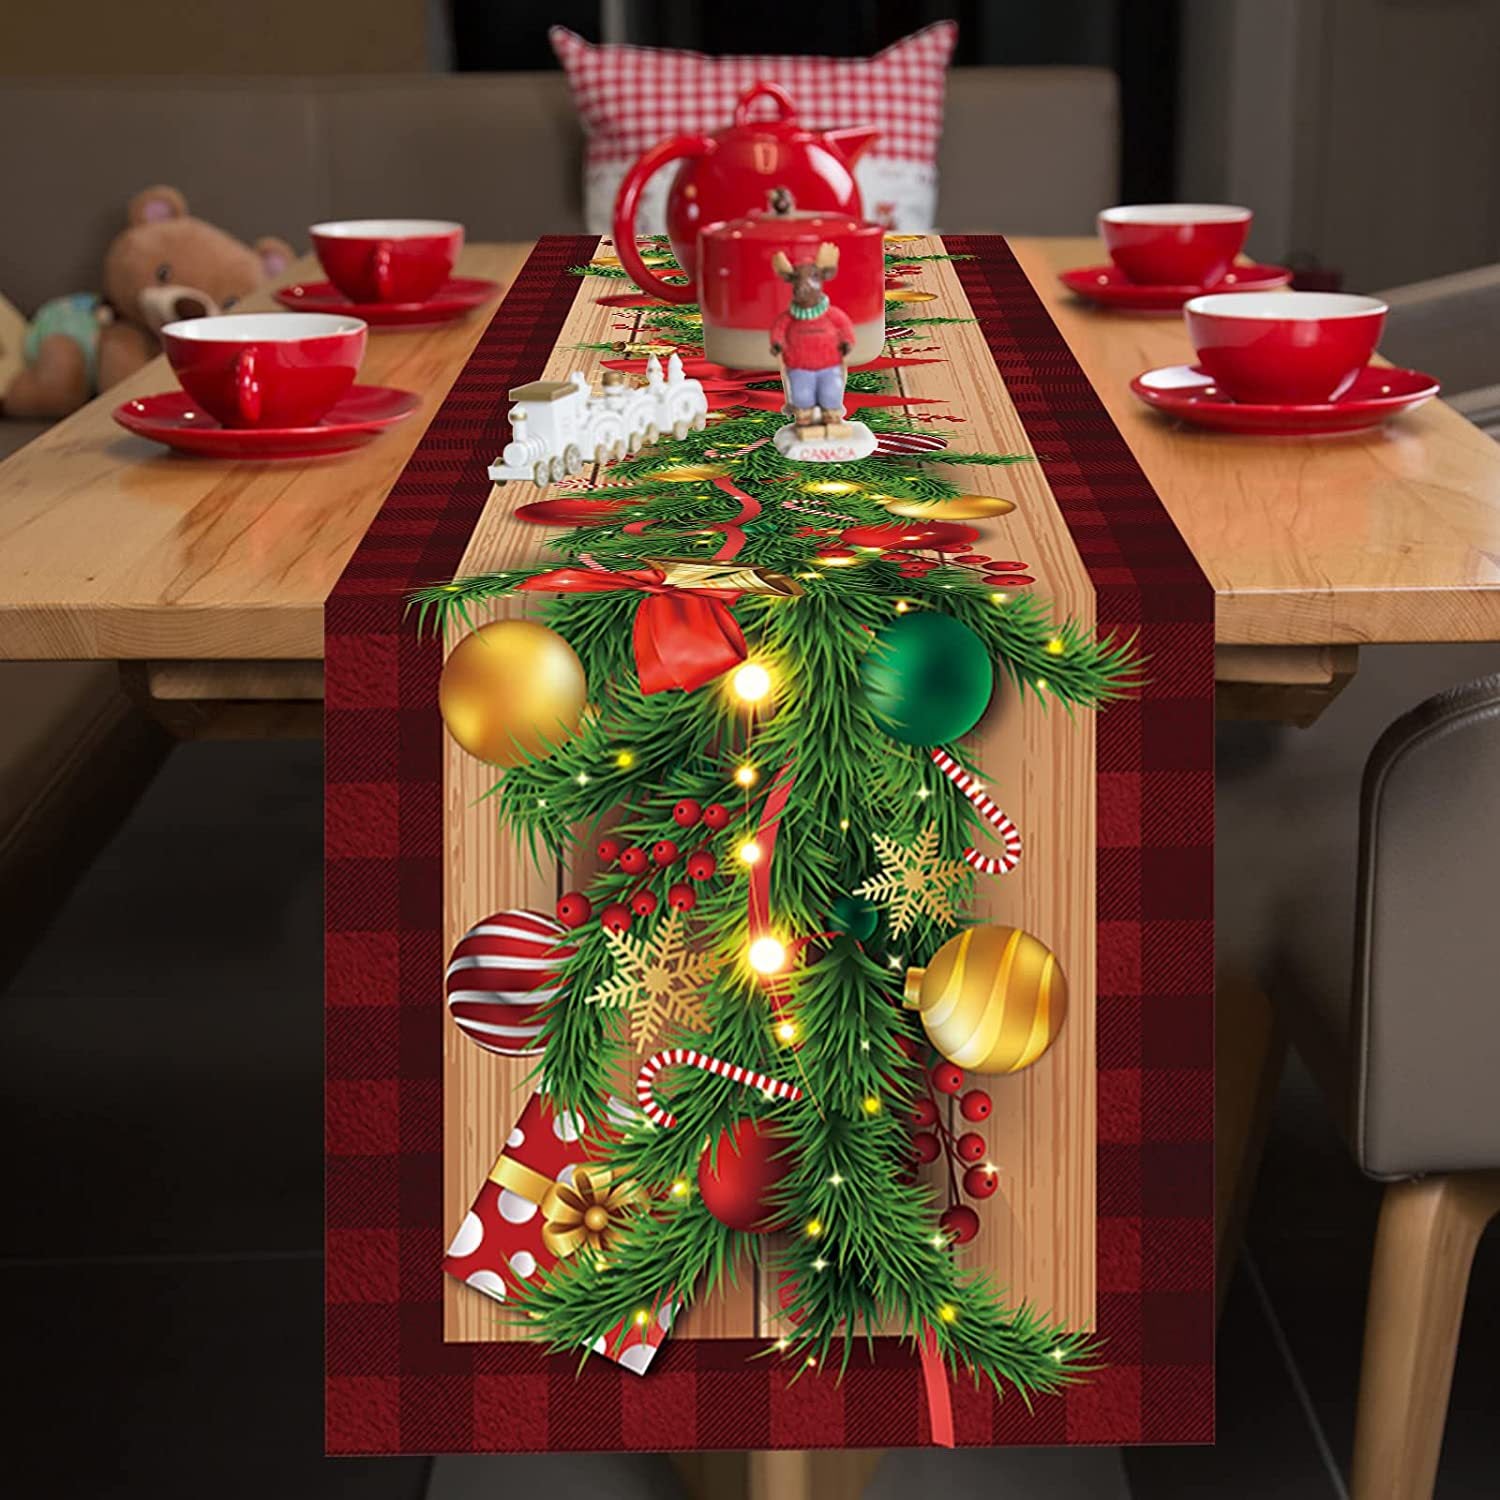 Linen Table Runner Christmas Home Dining Roomliving Room Holiday Decoration Tablecloth